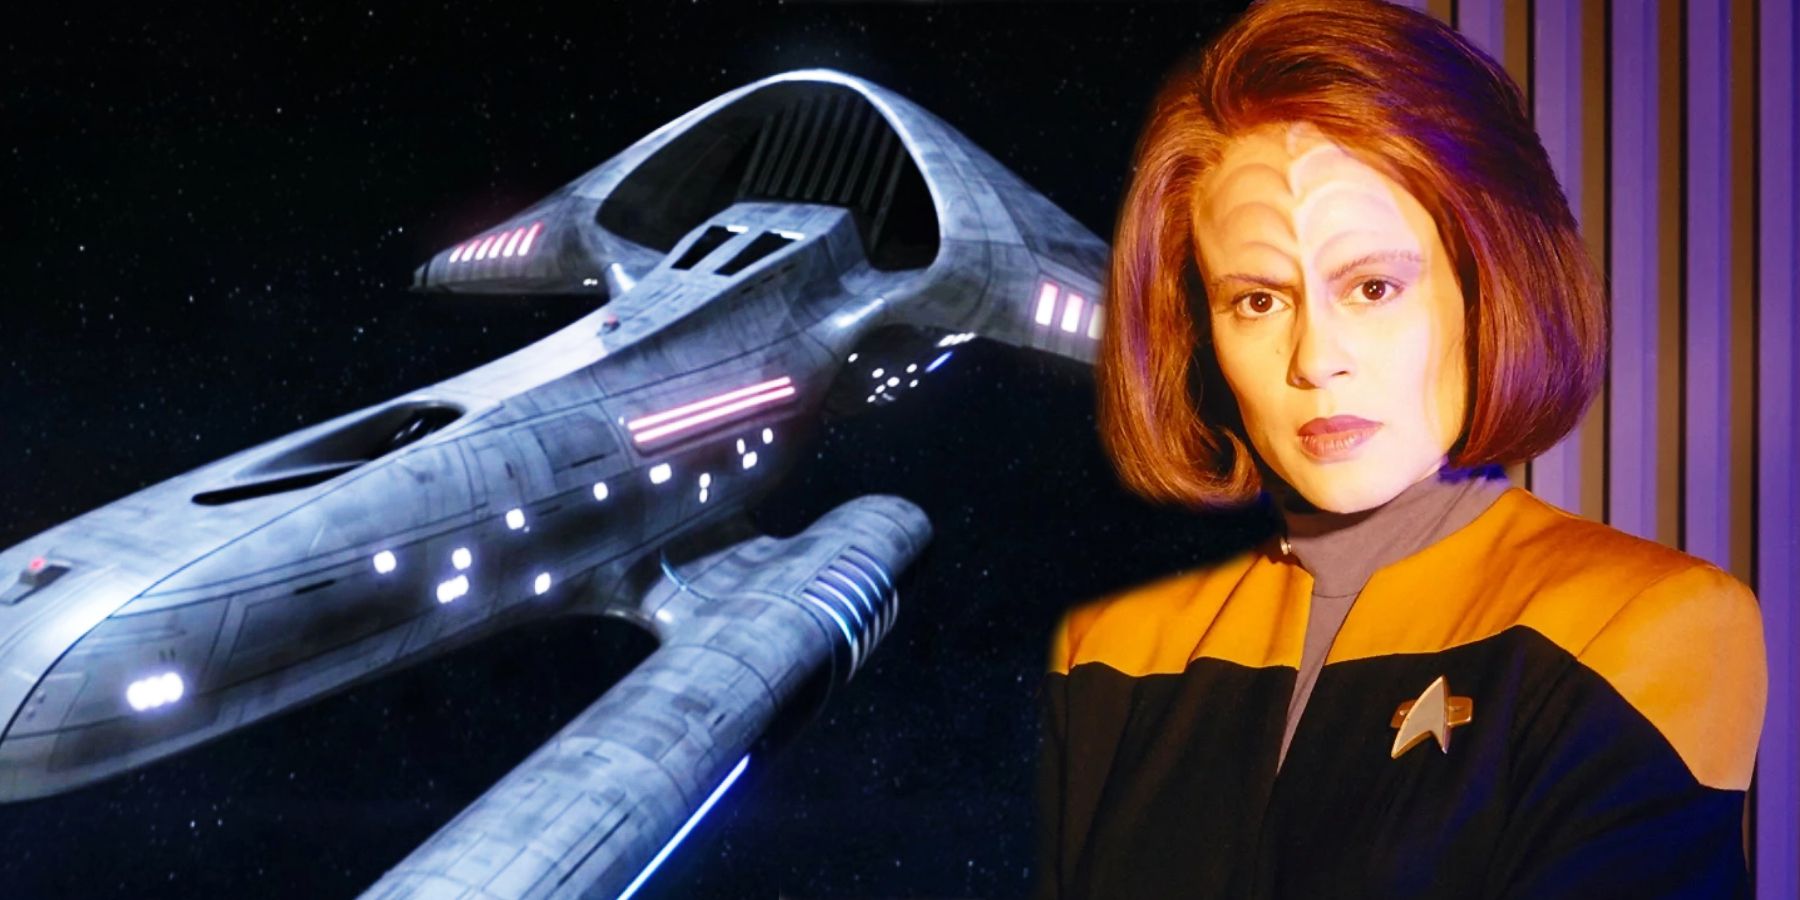 B'elanna Torres led construction of the USS Dauntless in Prodigy